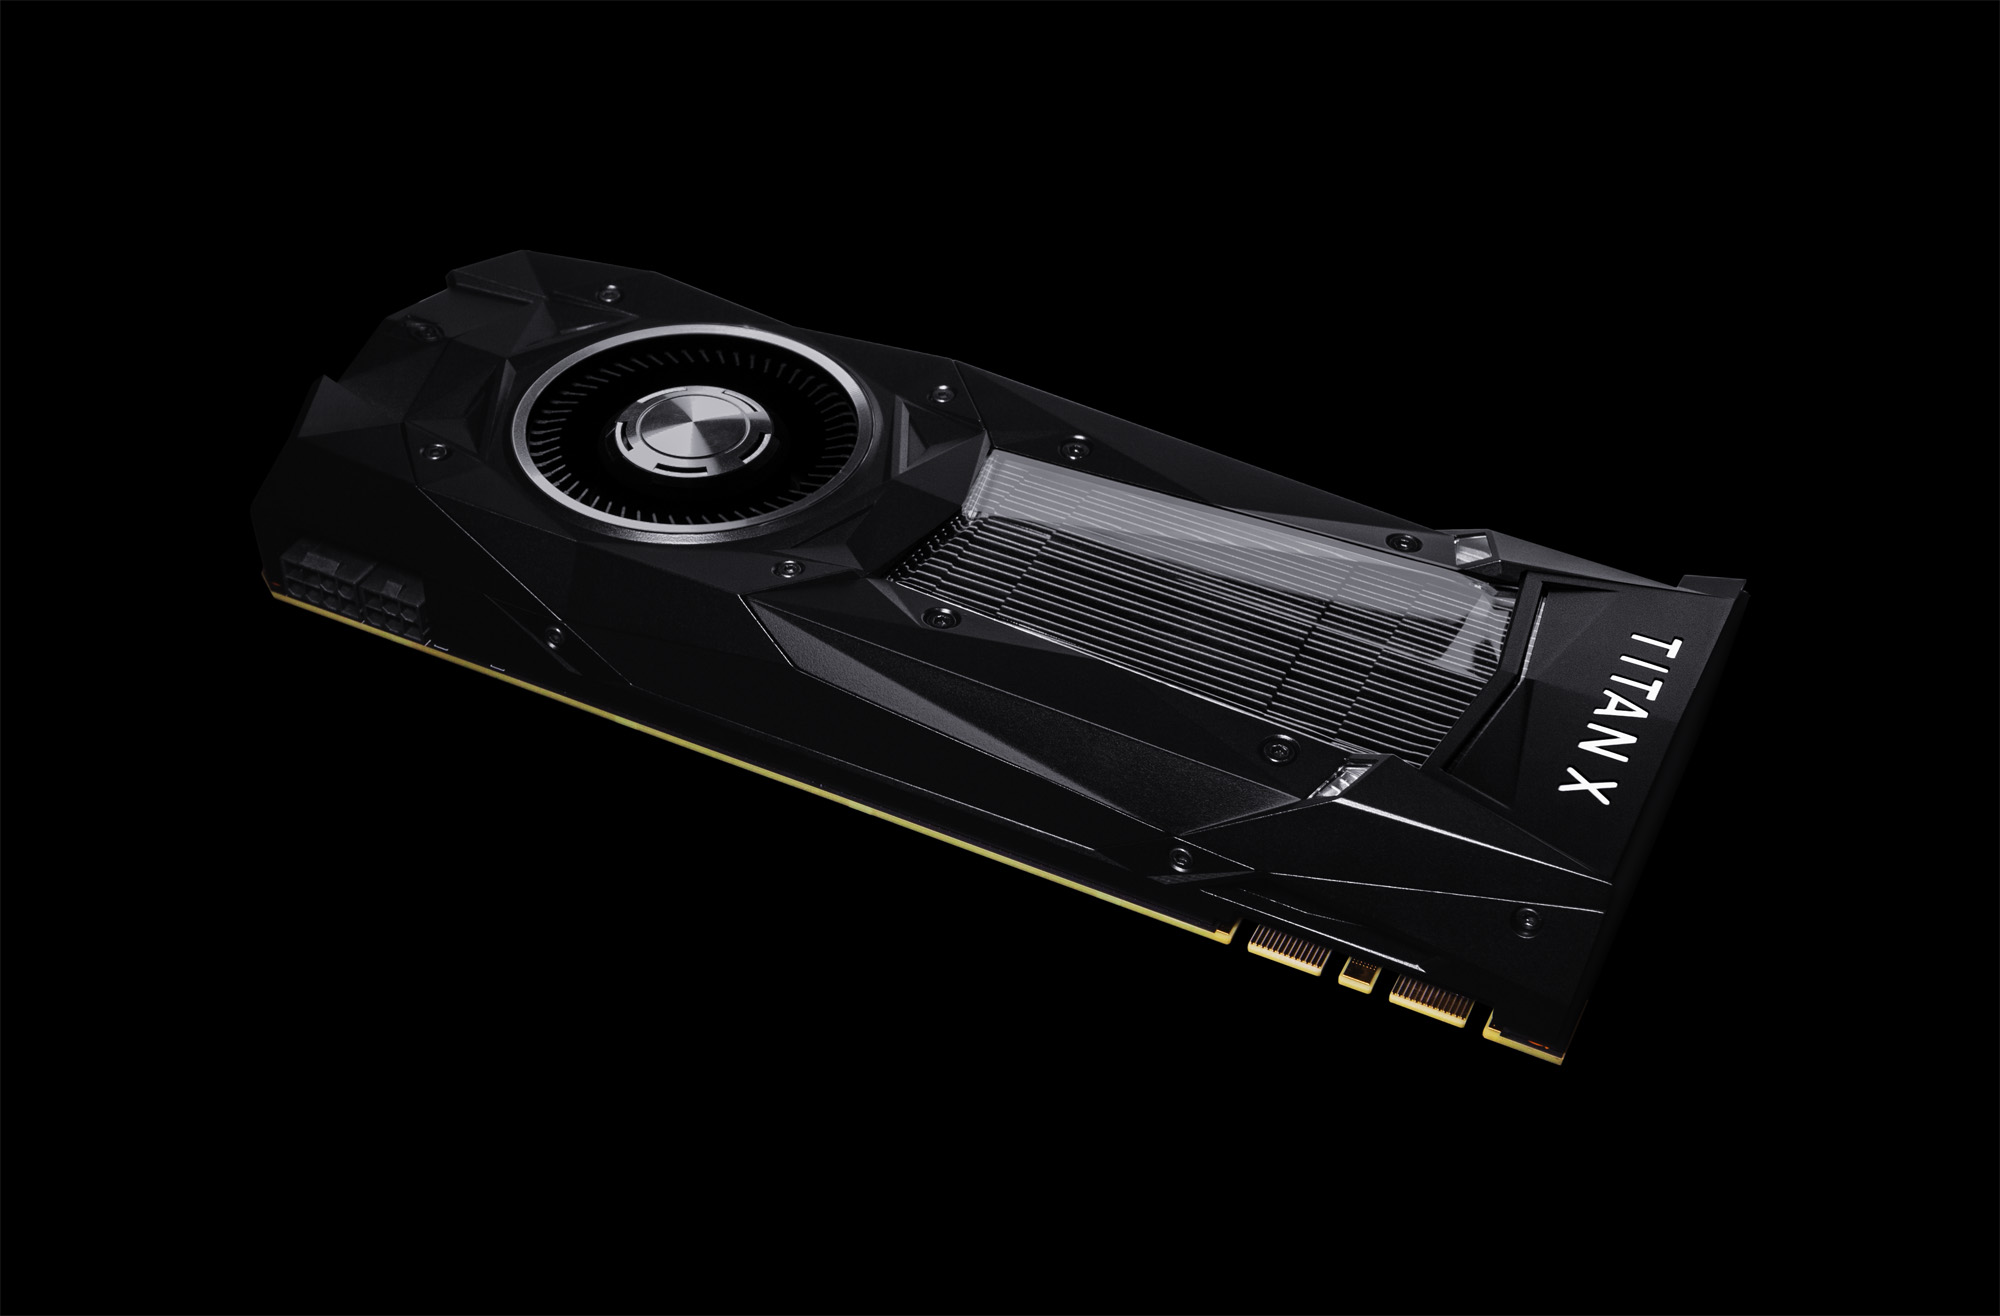 TITAN Xp Graphics Card with Pascal Architecture | NVIDIA GeForce